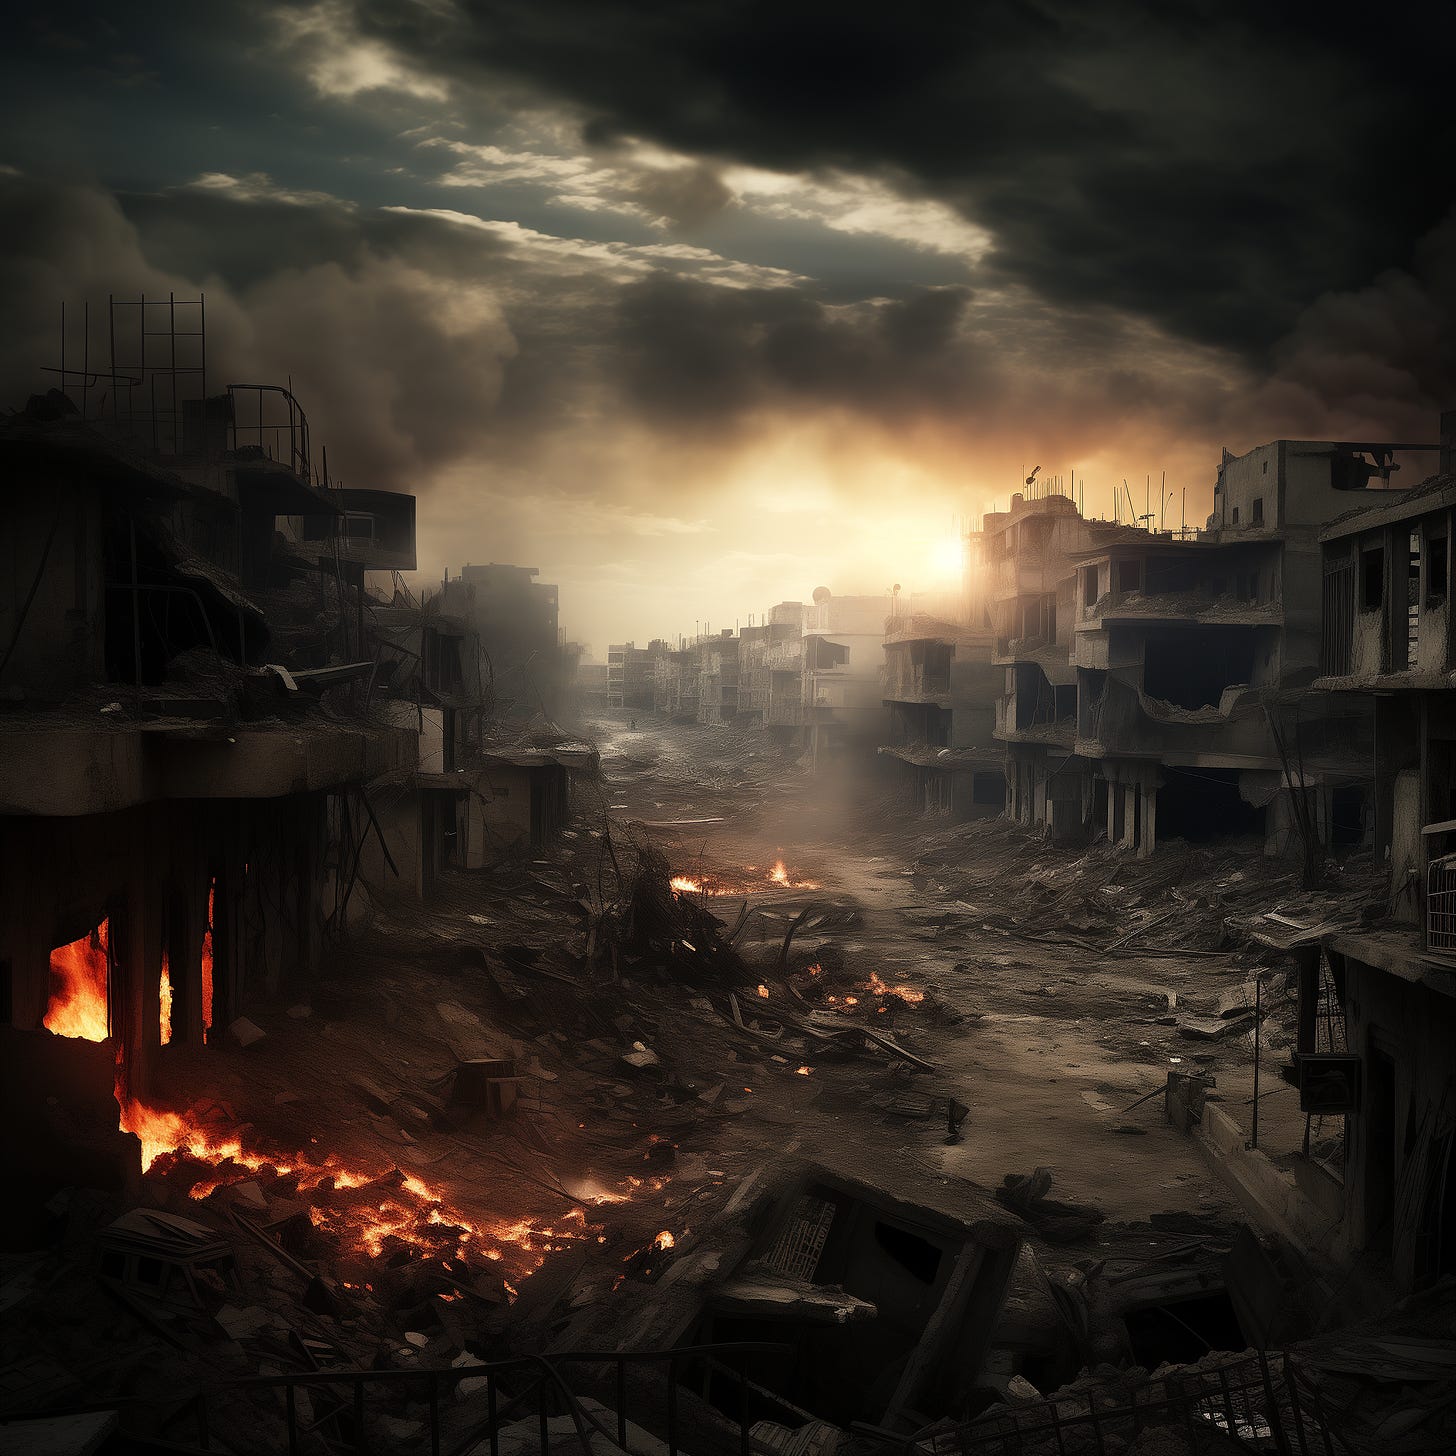 An imaginary rendering of a war zone